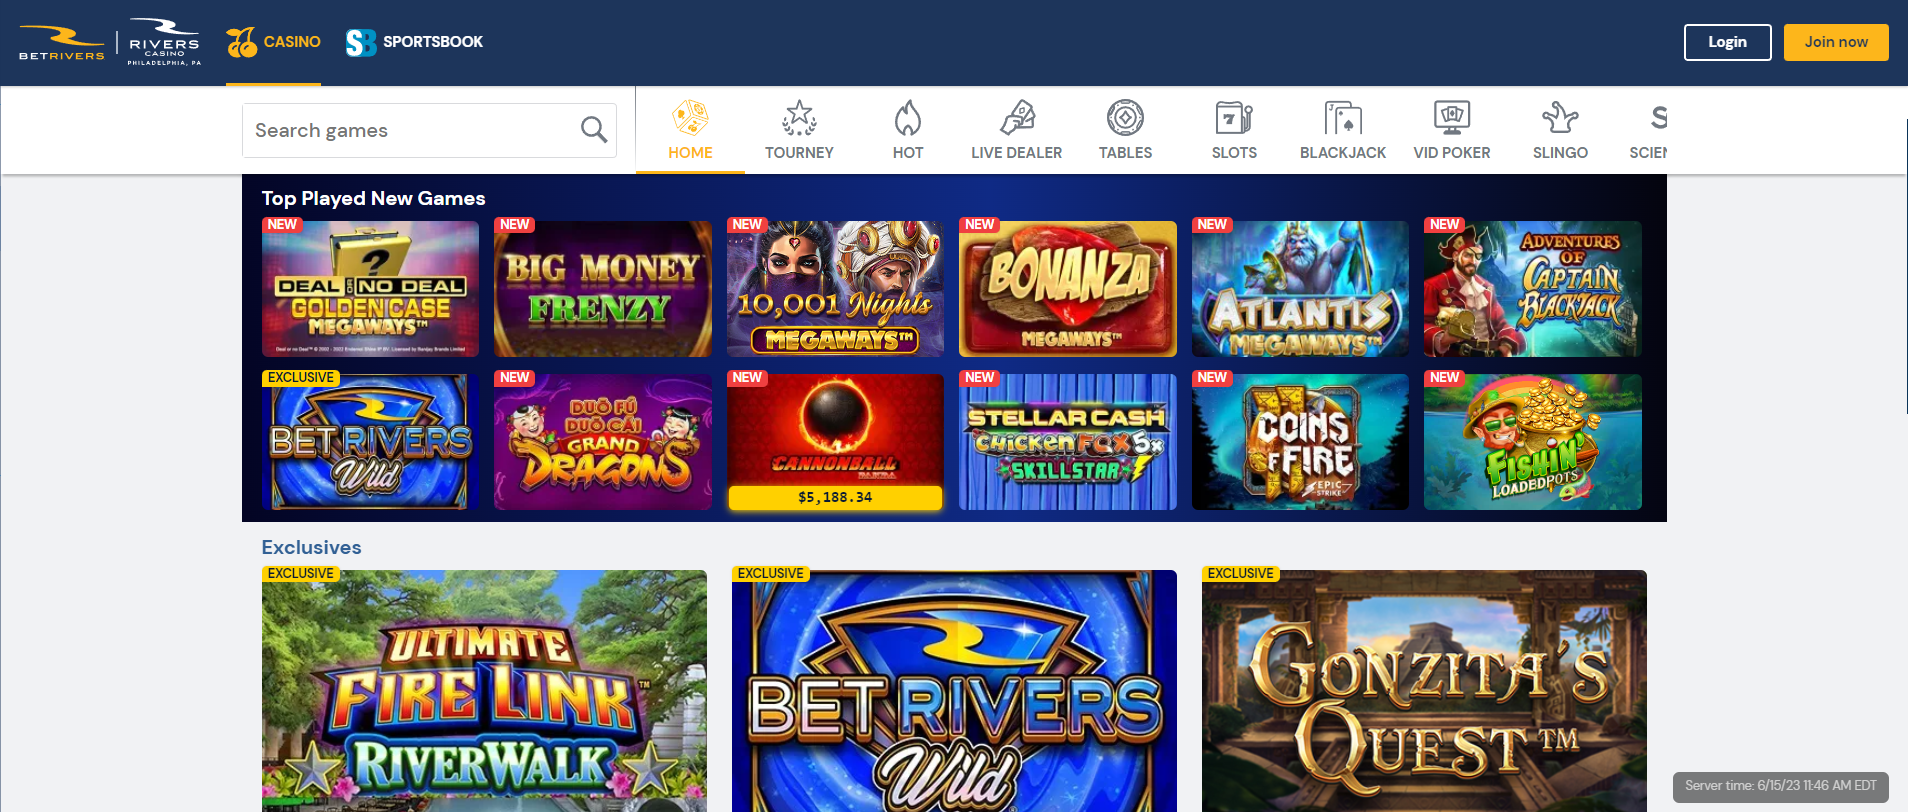 From exclusives to classics to jackpots -- BetRivers has it all